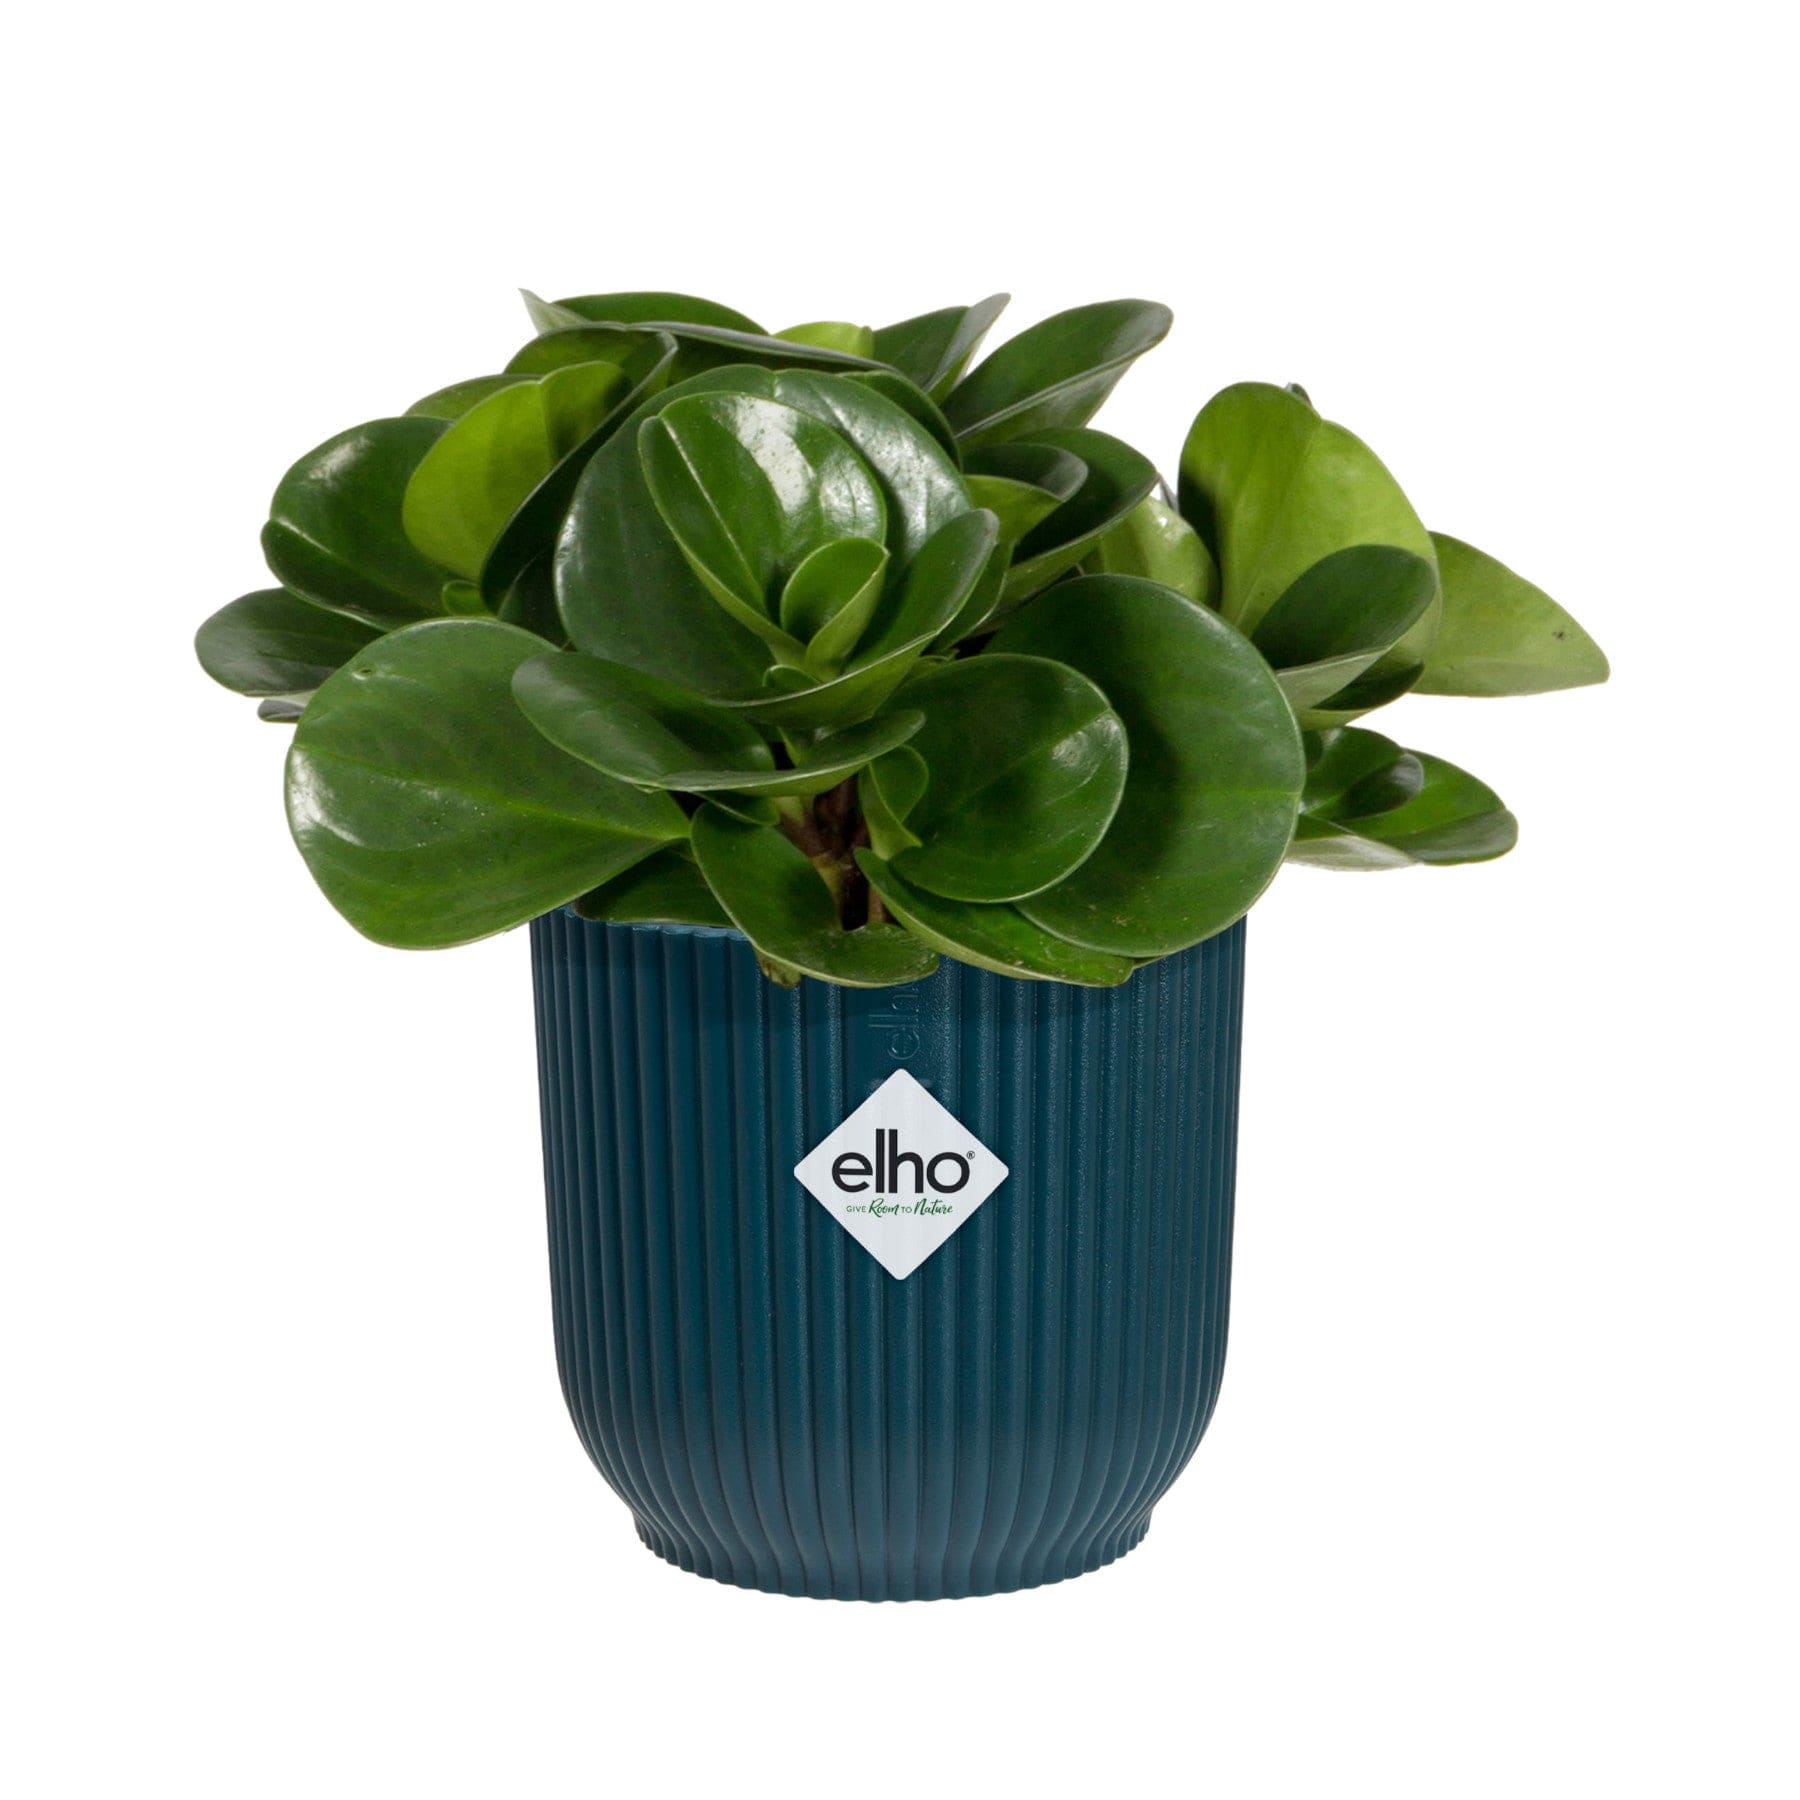 Green succulent plant in blue ribbed Elho pot isolated on white background.